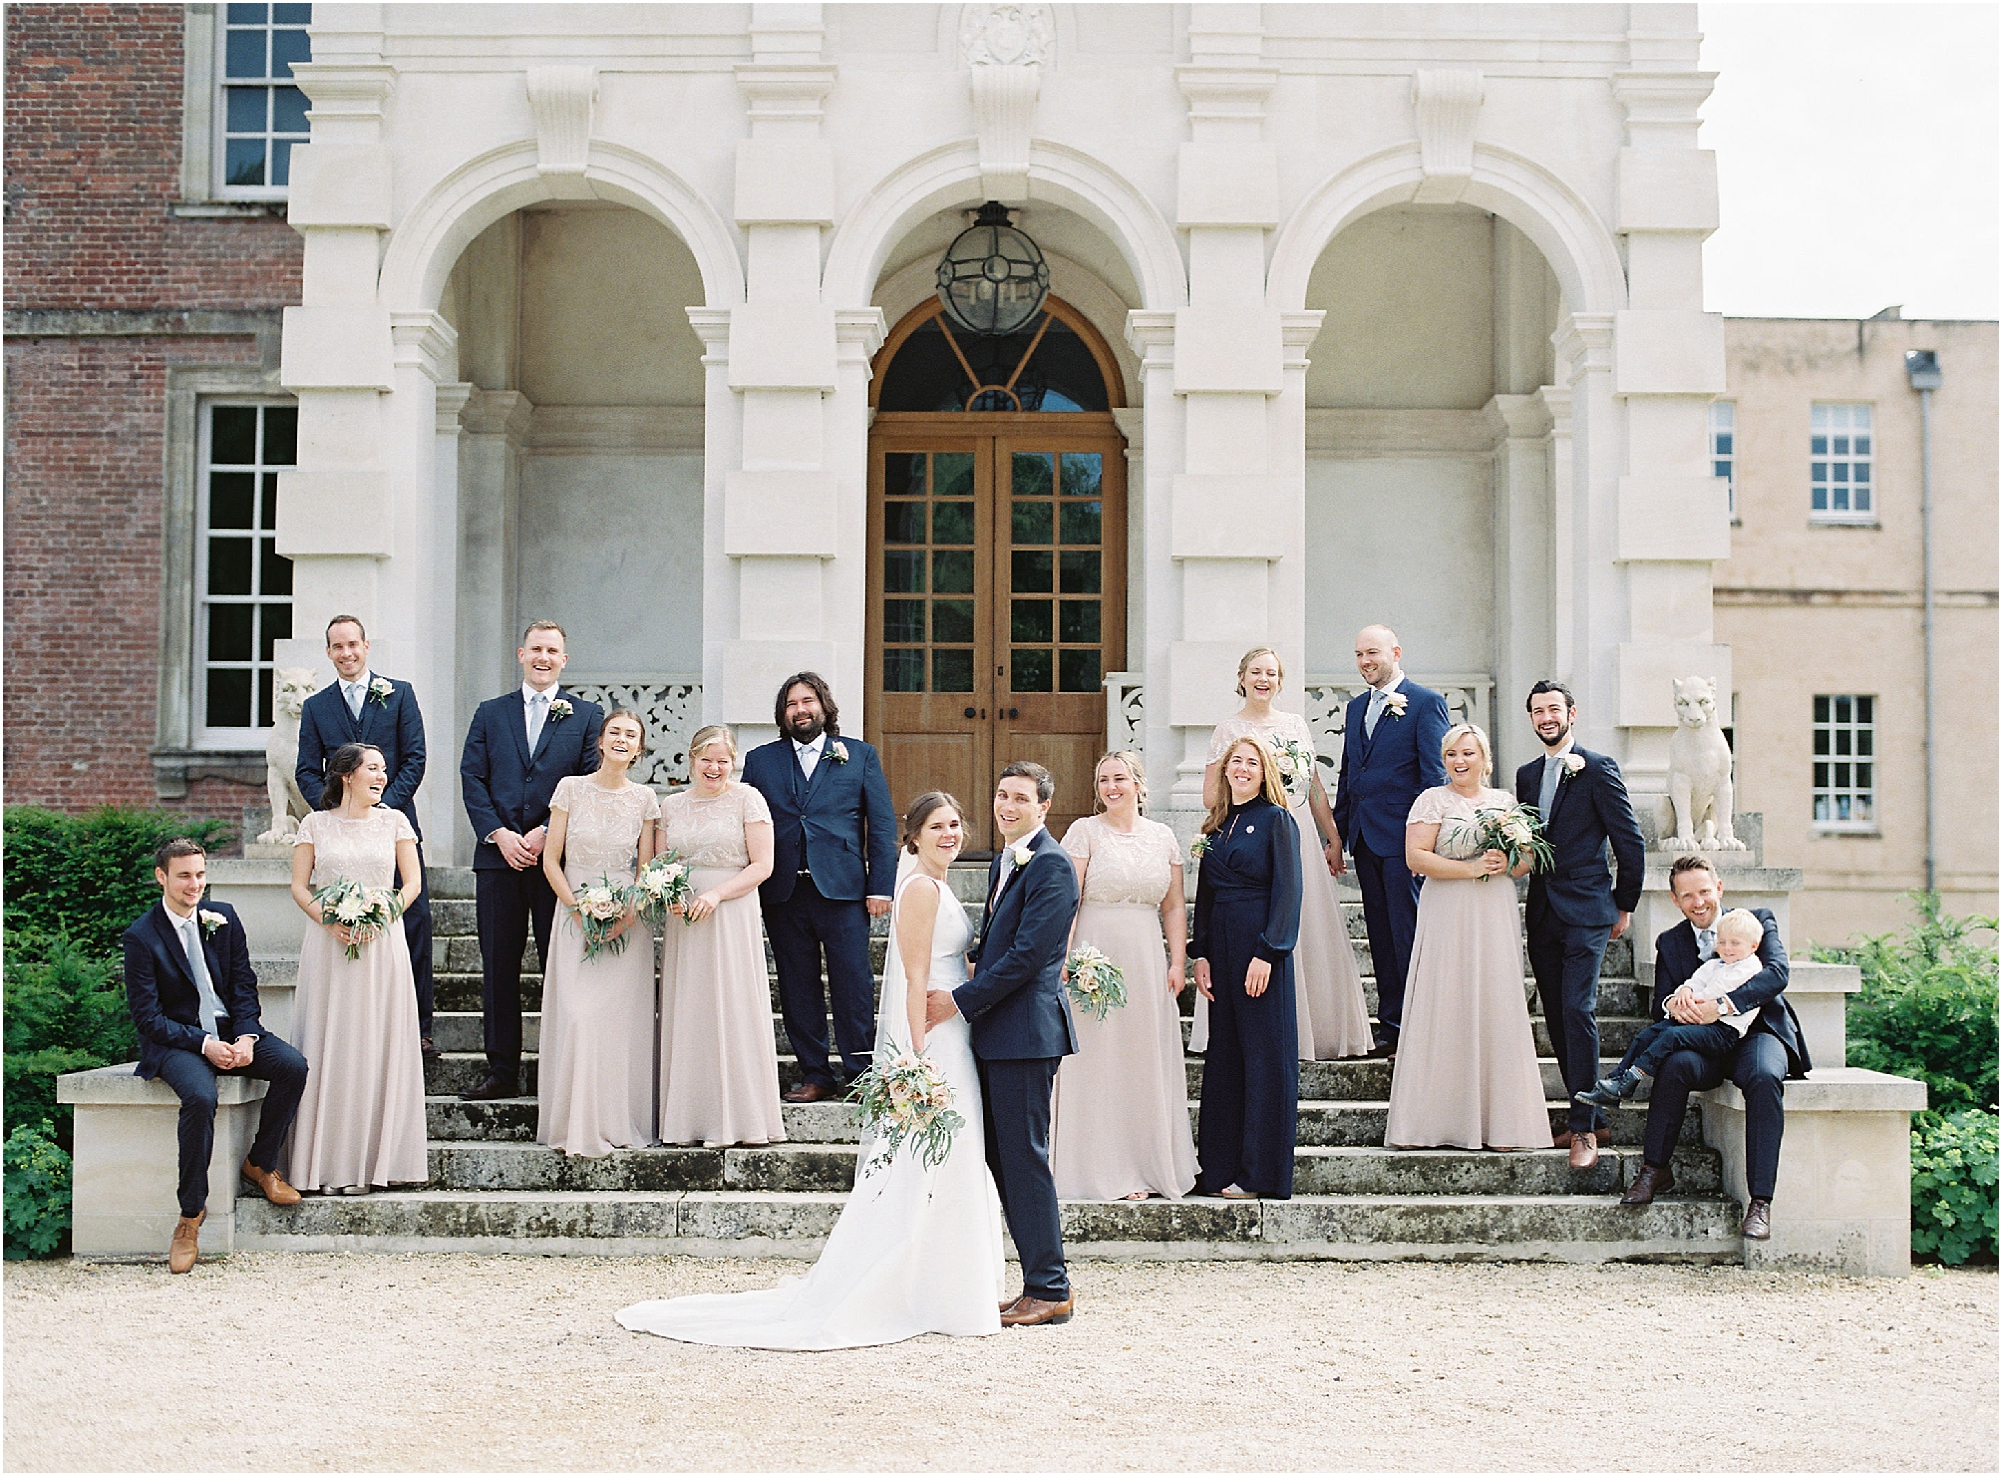 Relaxed bridal party photograph at St Giles House Dorset